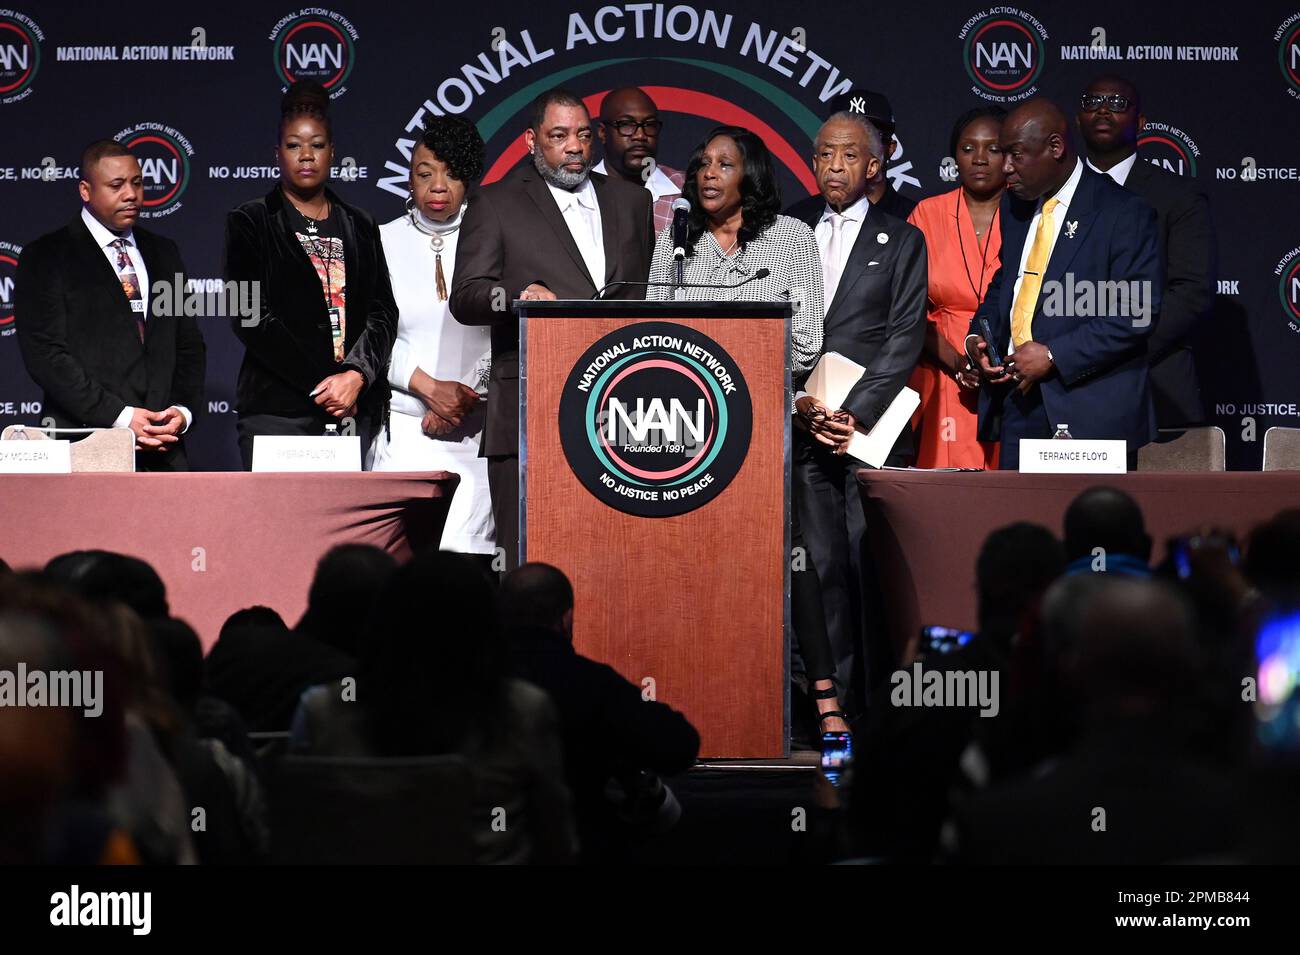 New York, USA. 12th Apr, 2023. (L-R) Andre Locke Sr., father of Amir Locke, Sybrina Fulton, mother of Trayvon Martin, Gwen Carr, mother of Eric Garner, Rodney Wells, step-father of Tyre Nichols, Philonise Floyd, brother of George Floyd, RowVaughn Wells, mother of Tyre Nichols, Rev. Al Sharpton, Terrence Floyd, brother of George Floyd, Wanda Cooper Jones, mother of Ahmaud Arbery, Attorney Benjamin Crump and guest attend the National Action Network (NAN) conference at the Sheraton Hotel, New York, NY, April 12, 2023. (Photo by Anthony Behar/Sipa USA) Credit: Sipa USA/Alamy Live News Stock Photo